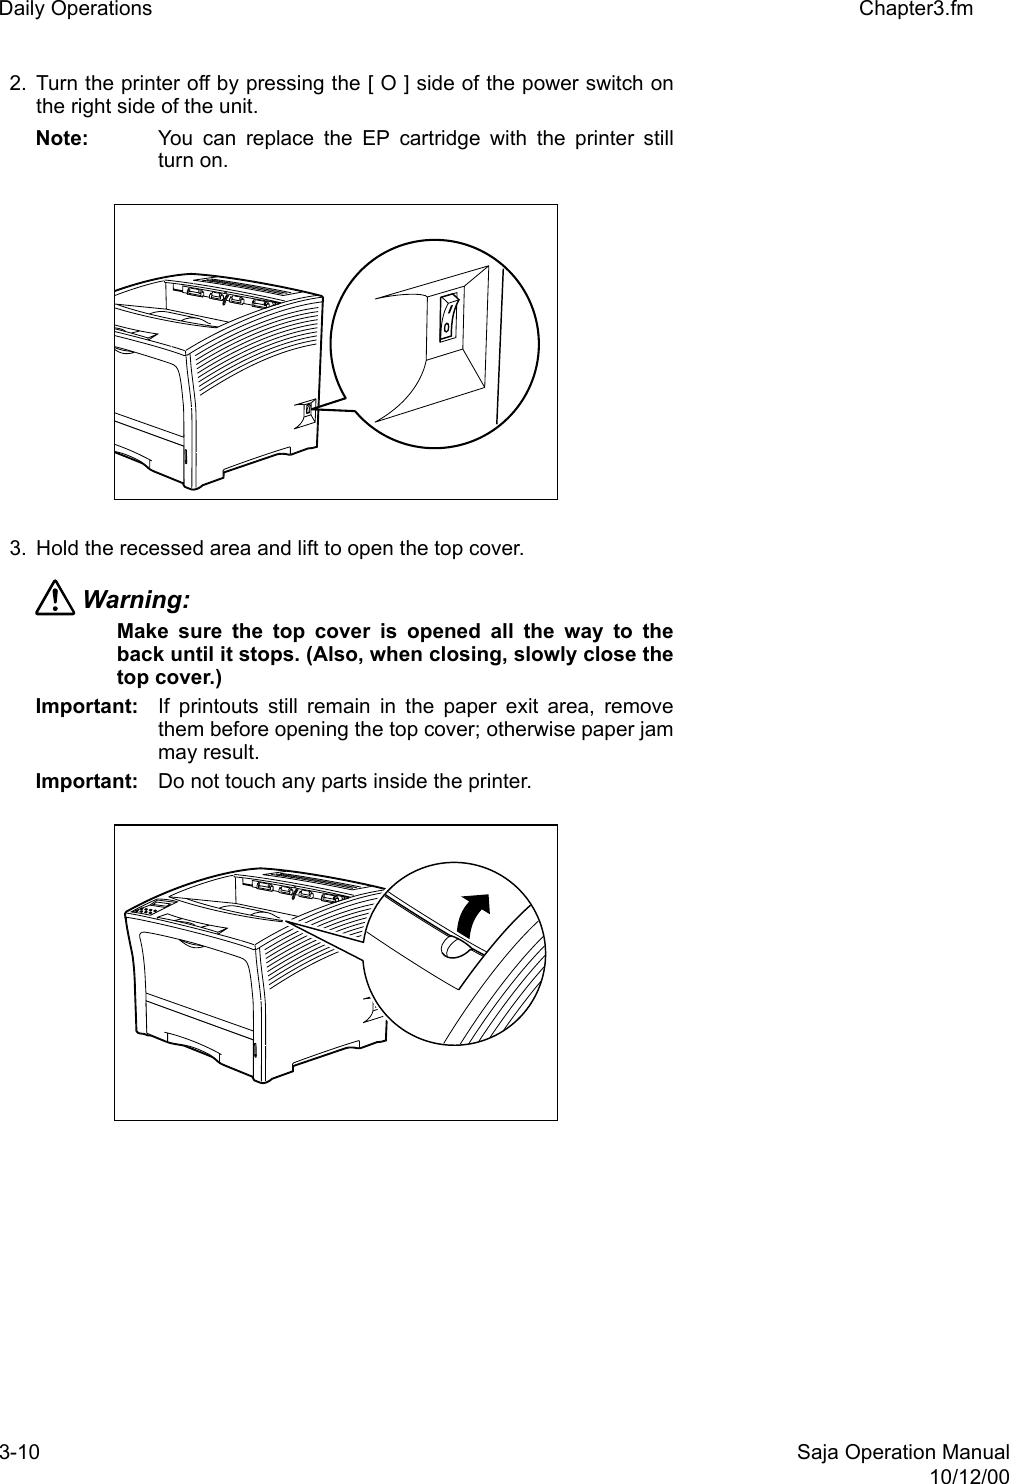 3-10 Saja Operation Manual10/12/00Daily Operations Chapter3.fm2. Turn the printer off by pressing the [ O ] side of the power switch onthe right side of the unit. Note: You can replace the EP cartridge with the printer stillturn on.3. Hold the recessed area and lift to open the top cover.Warning: Make sure the top cover is opened all the way to theback until it stops. (Also, when closing, slowly close thetop cover.) Important: If printouts still remain in the paper exit area, removethem before opening the top cover; otherwise paper jammay result.Important: Do not touch any parts inside the printer. 